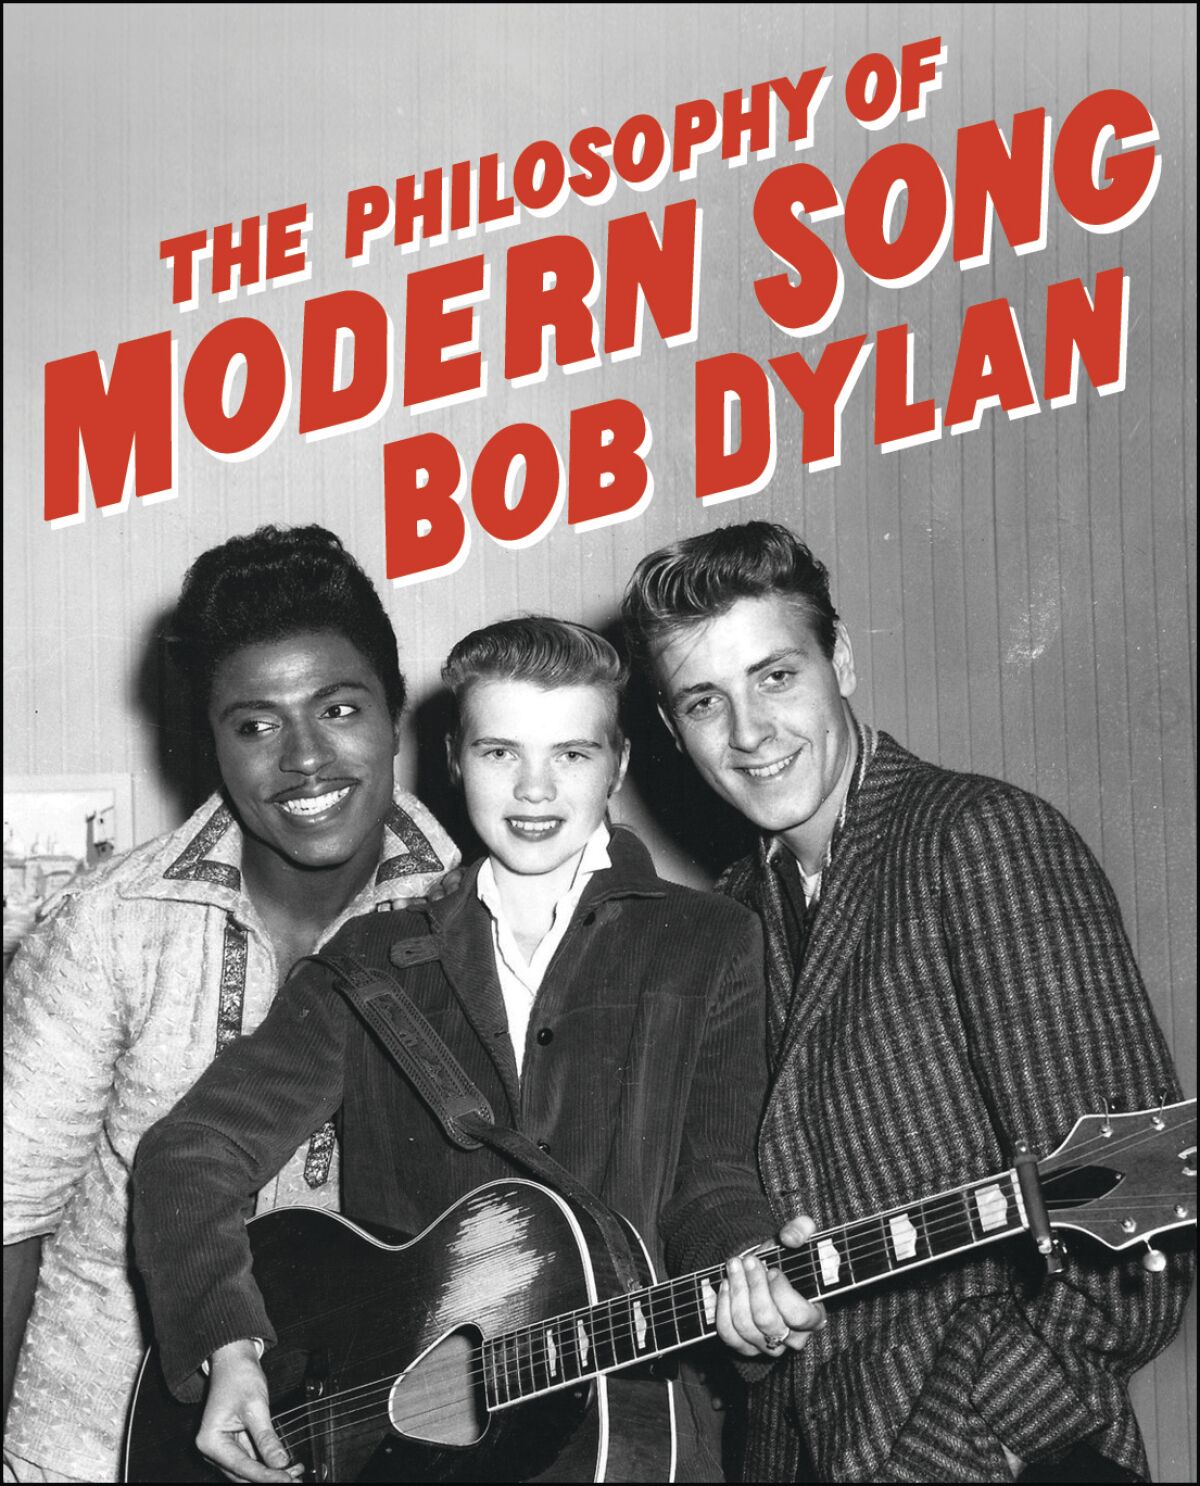 "The Philosophy of Modern Song" by Bob Dylan